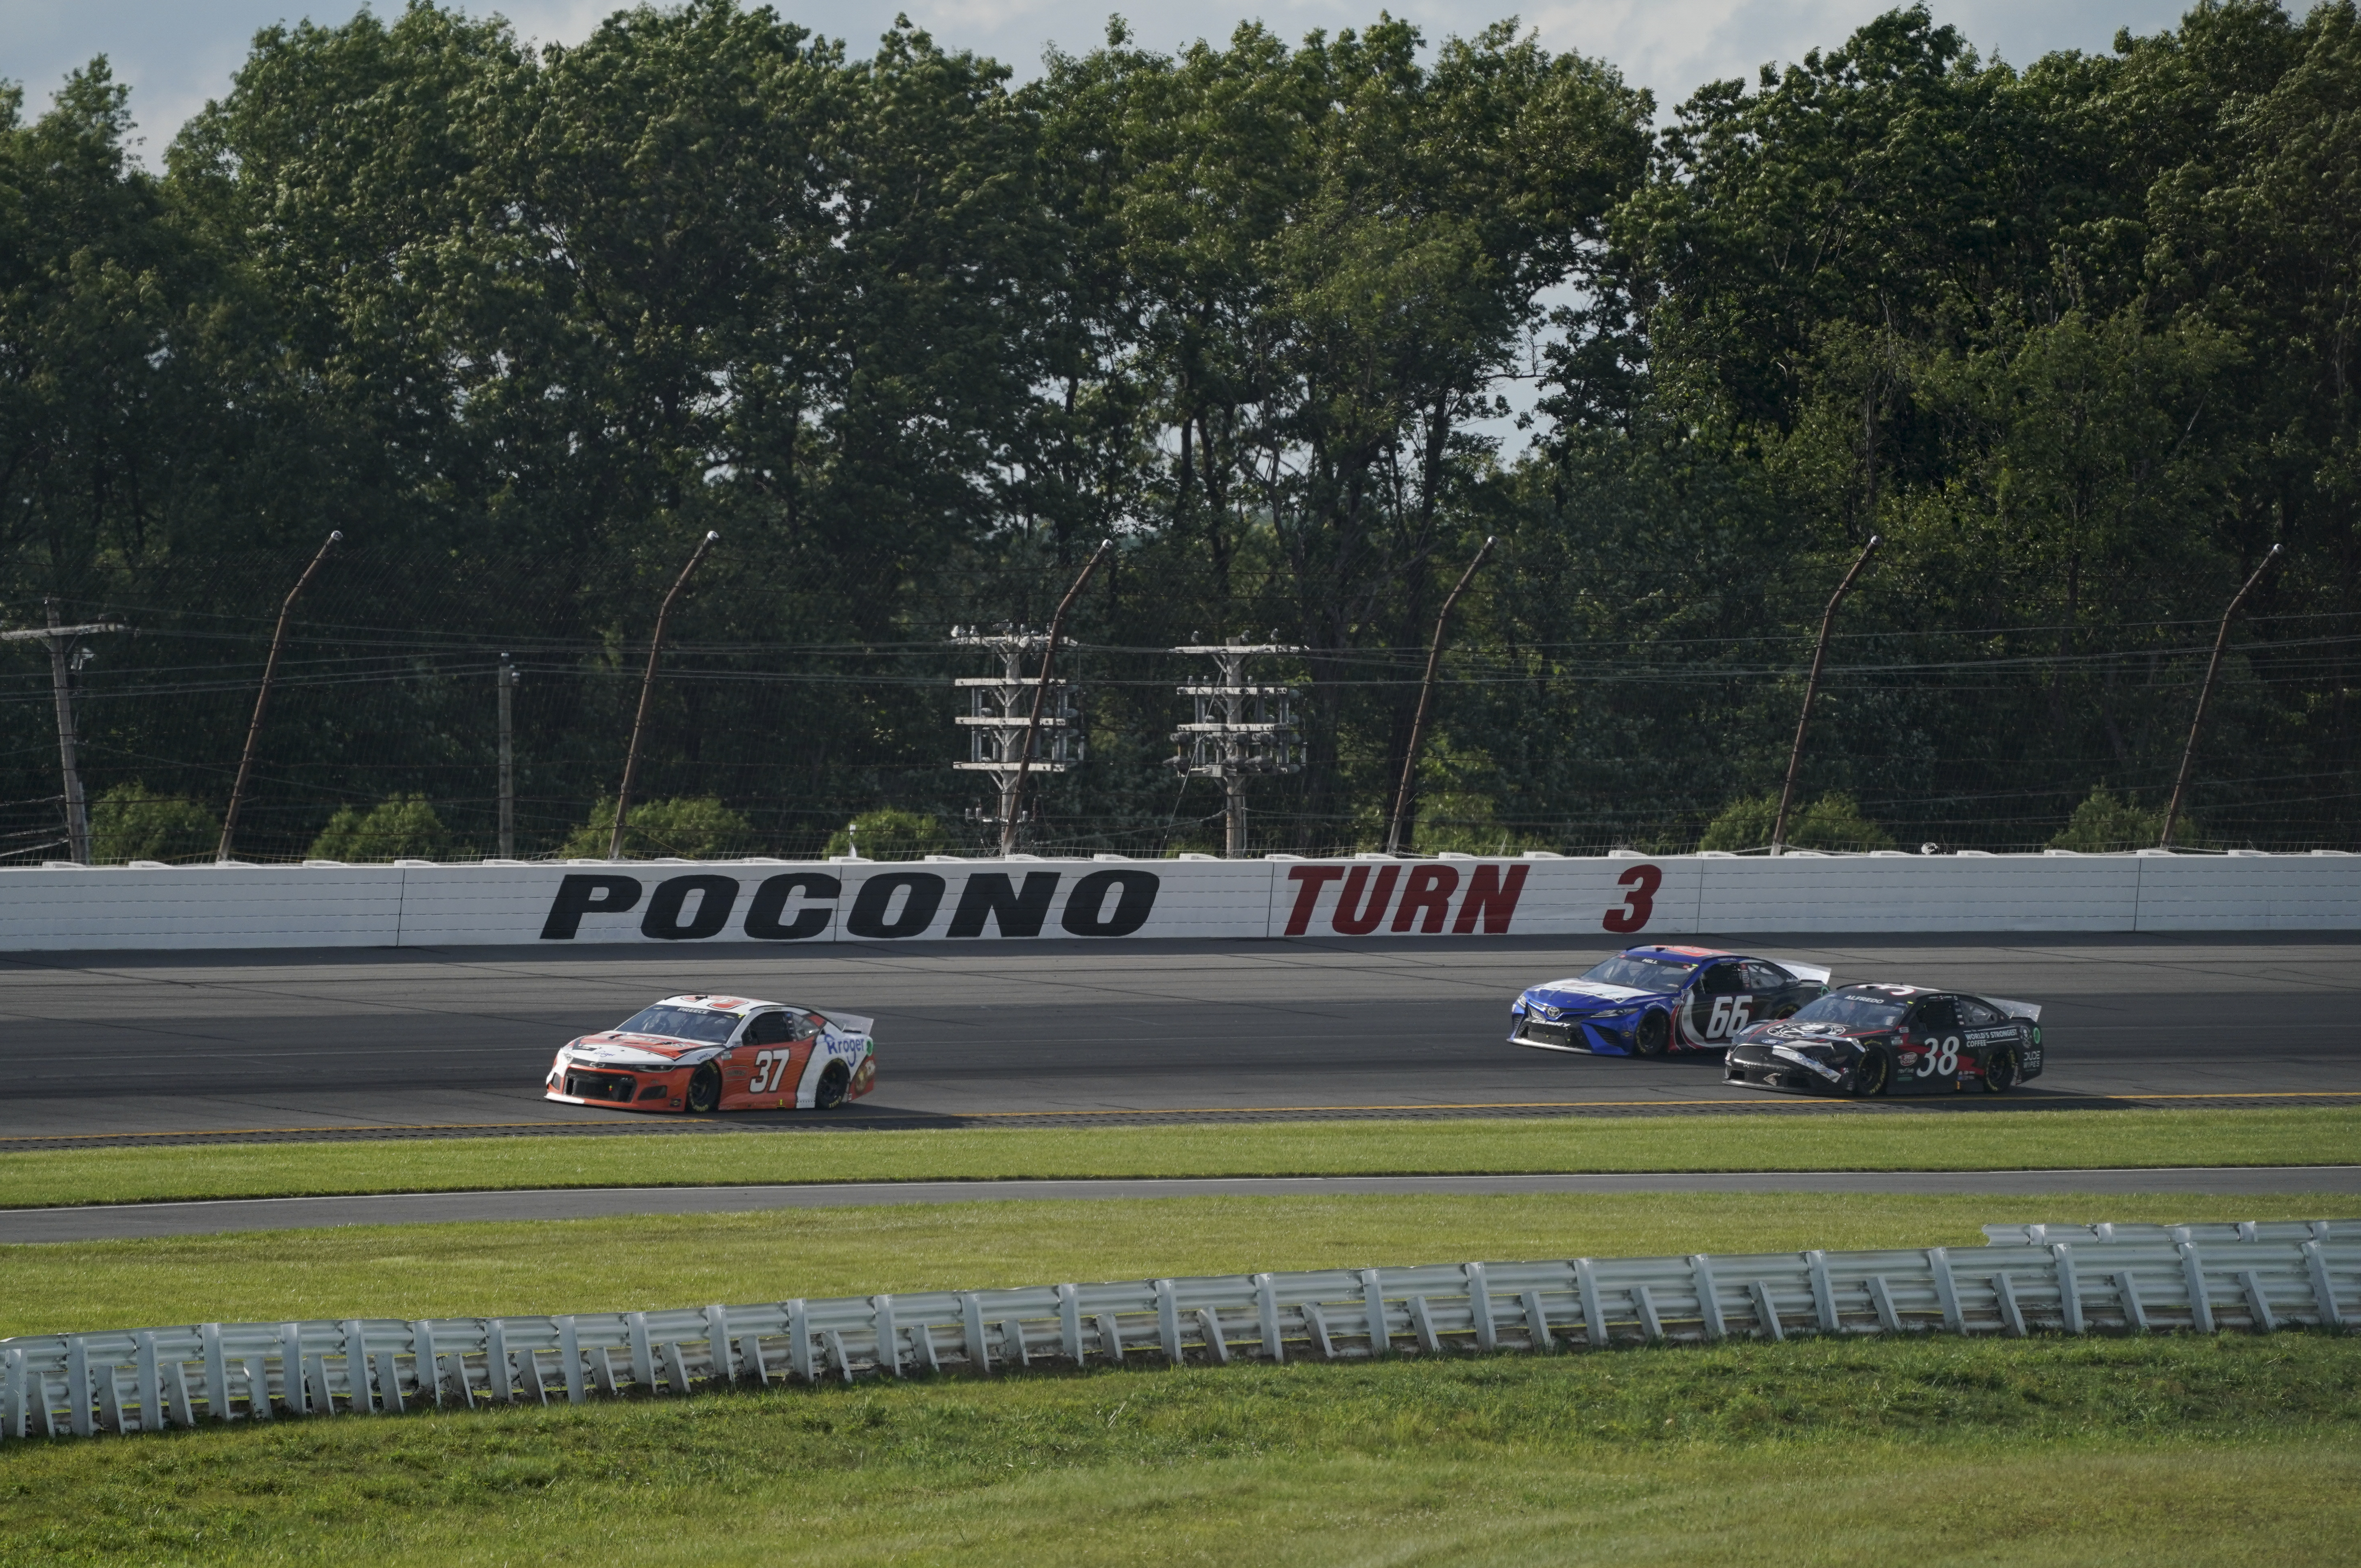 Pocono Raceway marking 50th anniversary of NASCAR competition with 3 days of racing